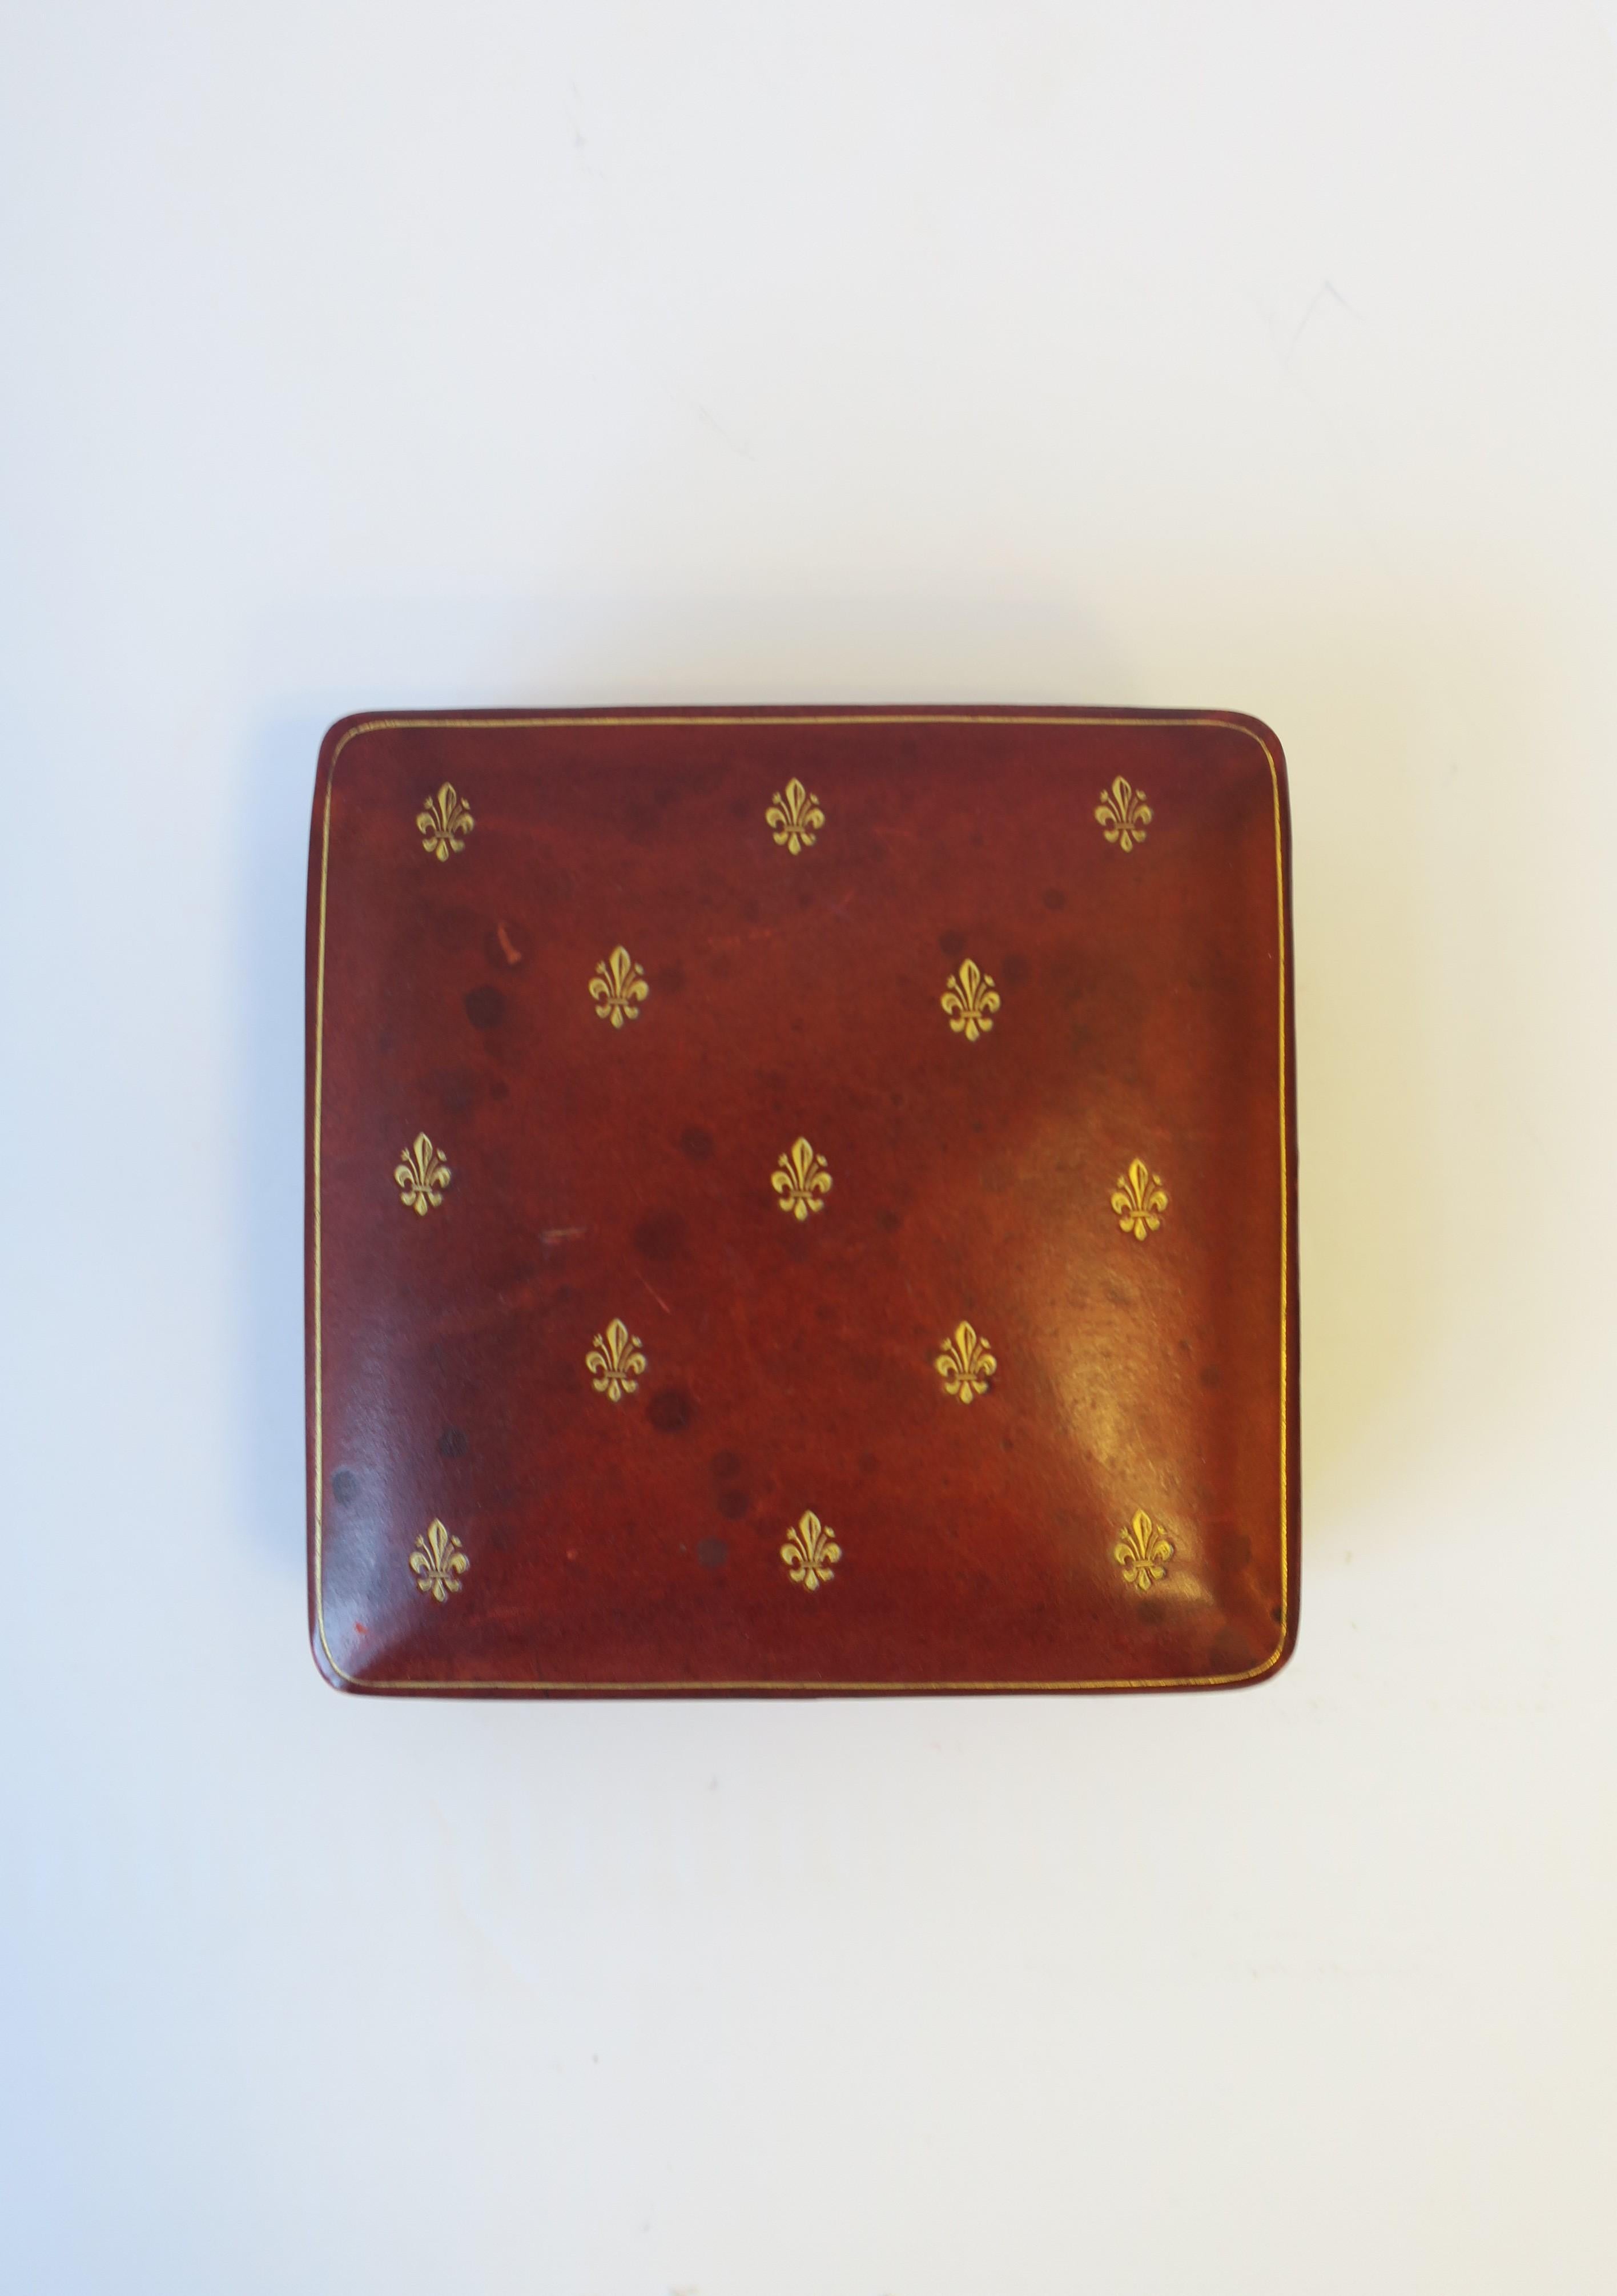 A beautiful mid-20th century Italian red, burgundy, or 'ox blood' leather jewelry, vanity or trinket box, with gold embossing and gold fleur-de-lis design on top. Marked 'LEATHER SCHOOL FLORENCE